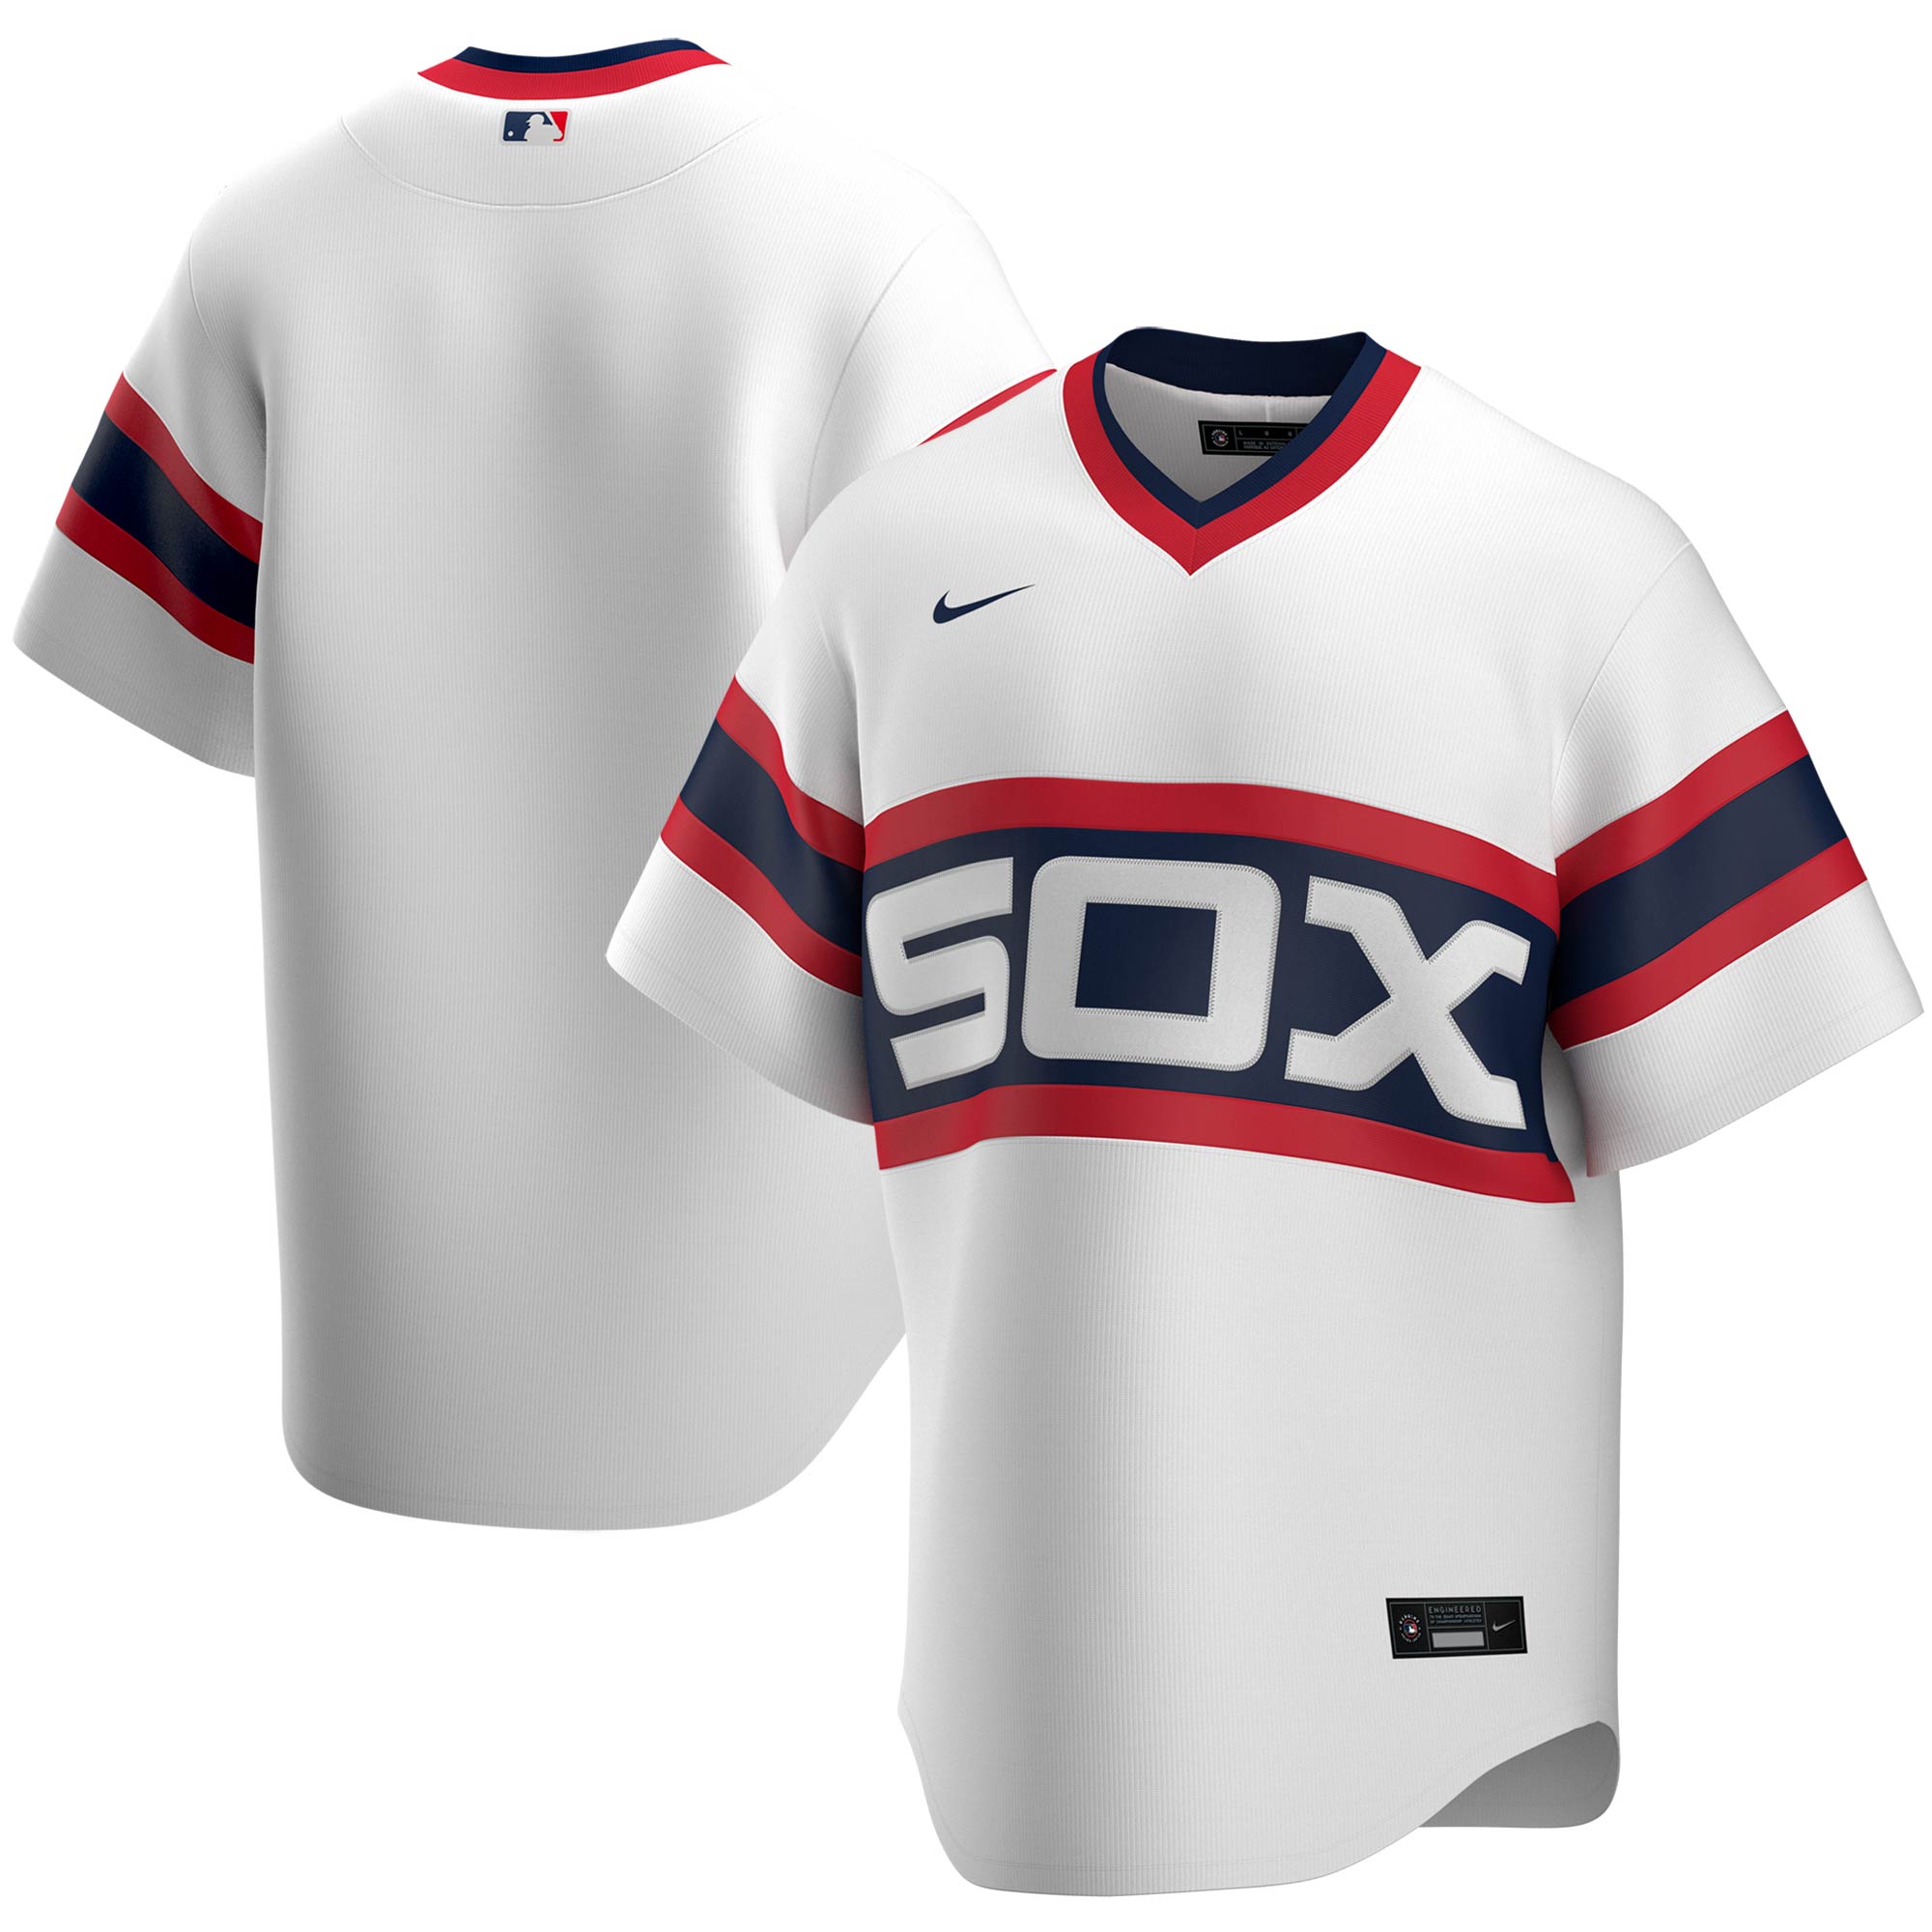 Chicago White Sox 1959 Home Replica Jersey by Nike | Grandstand Ltd.